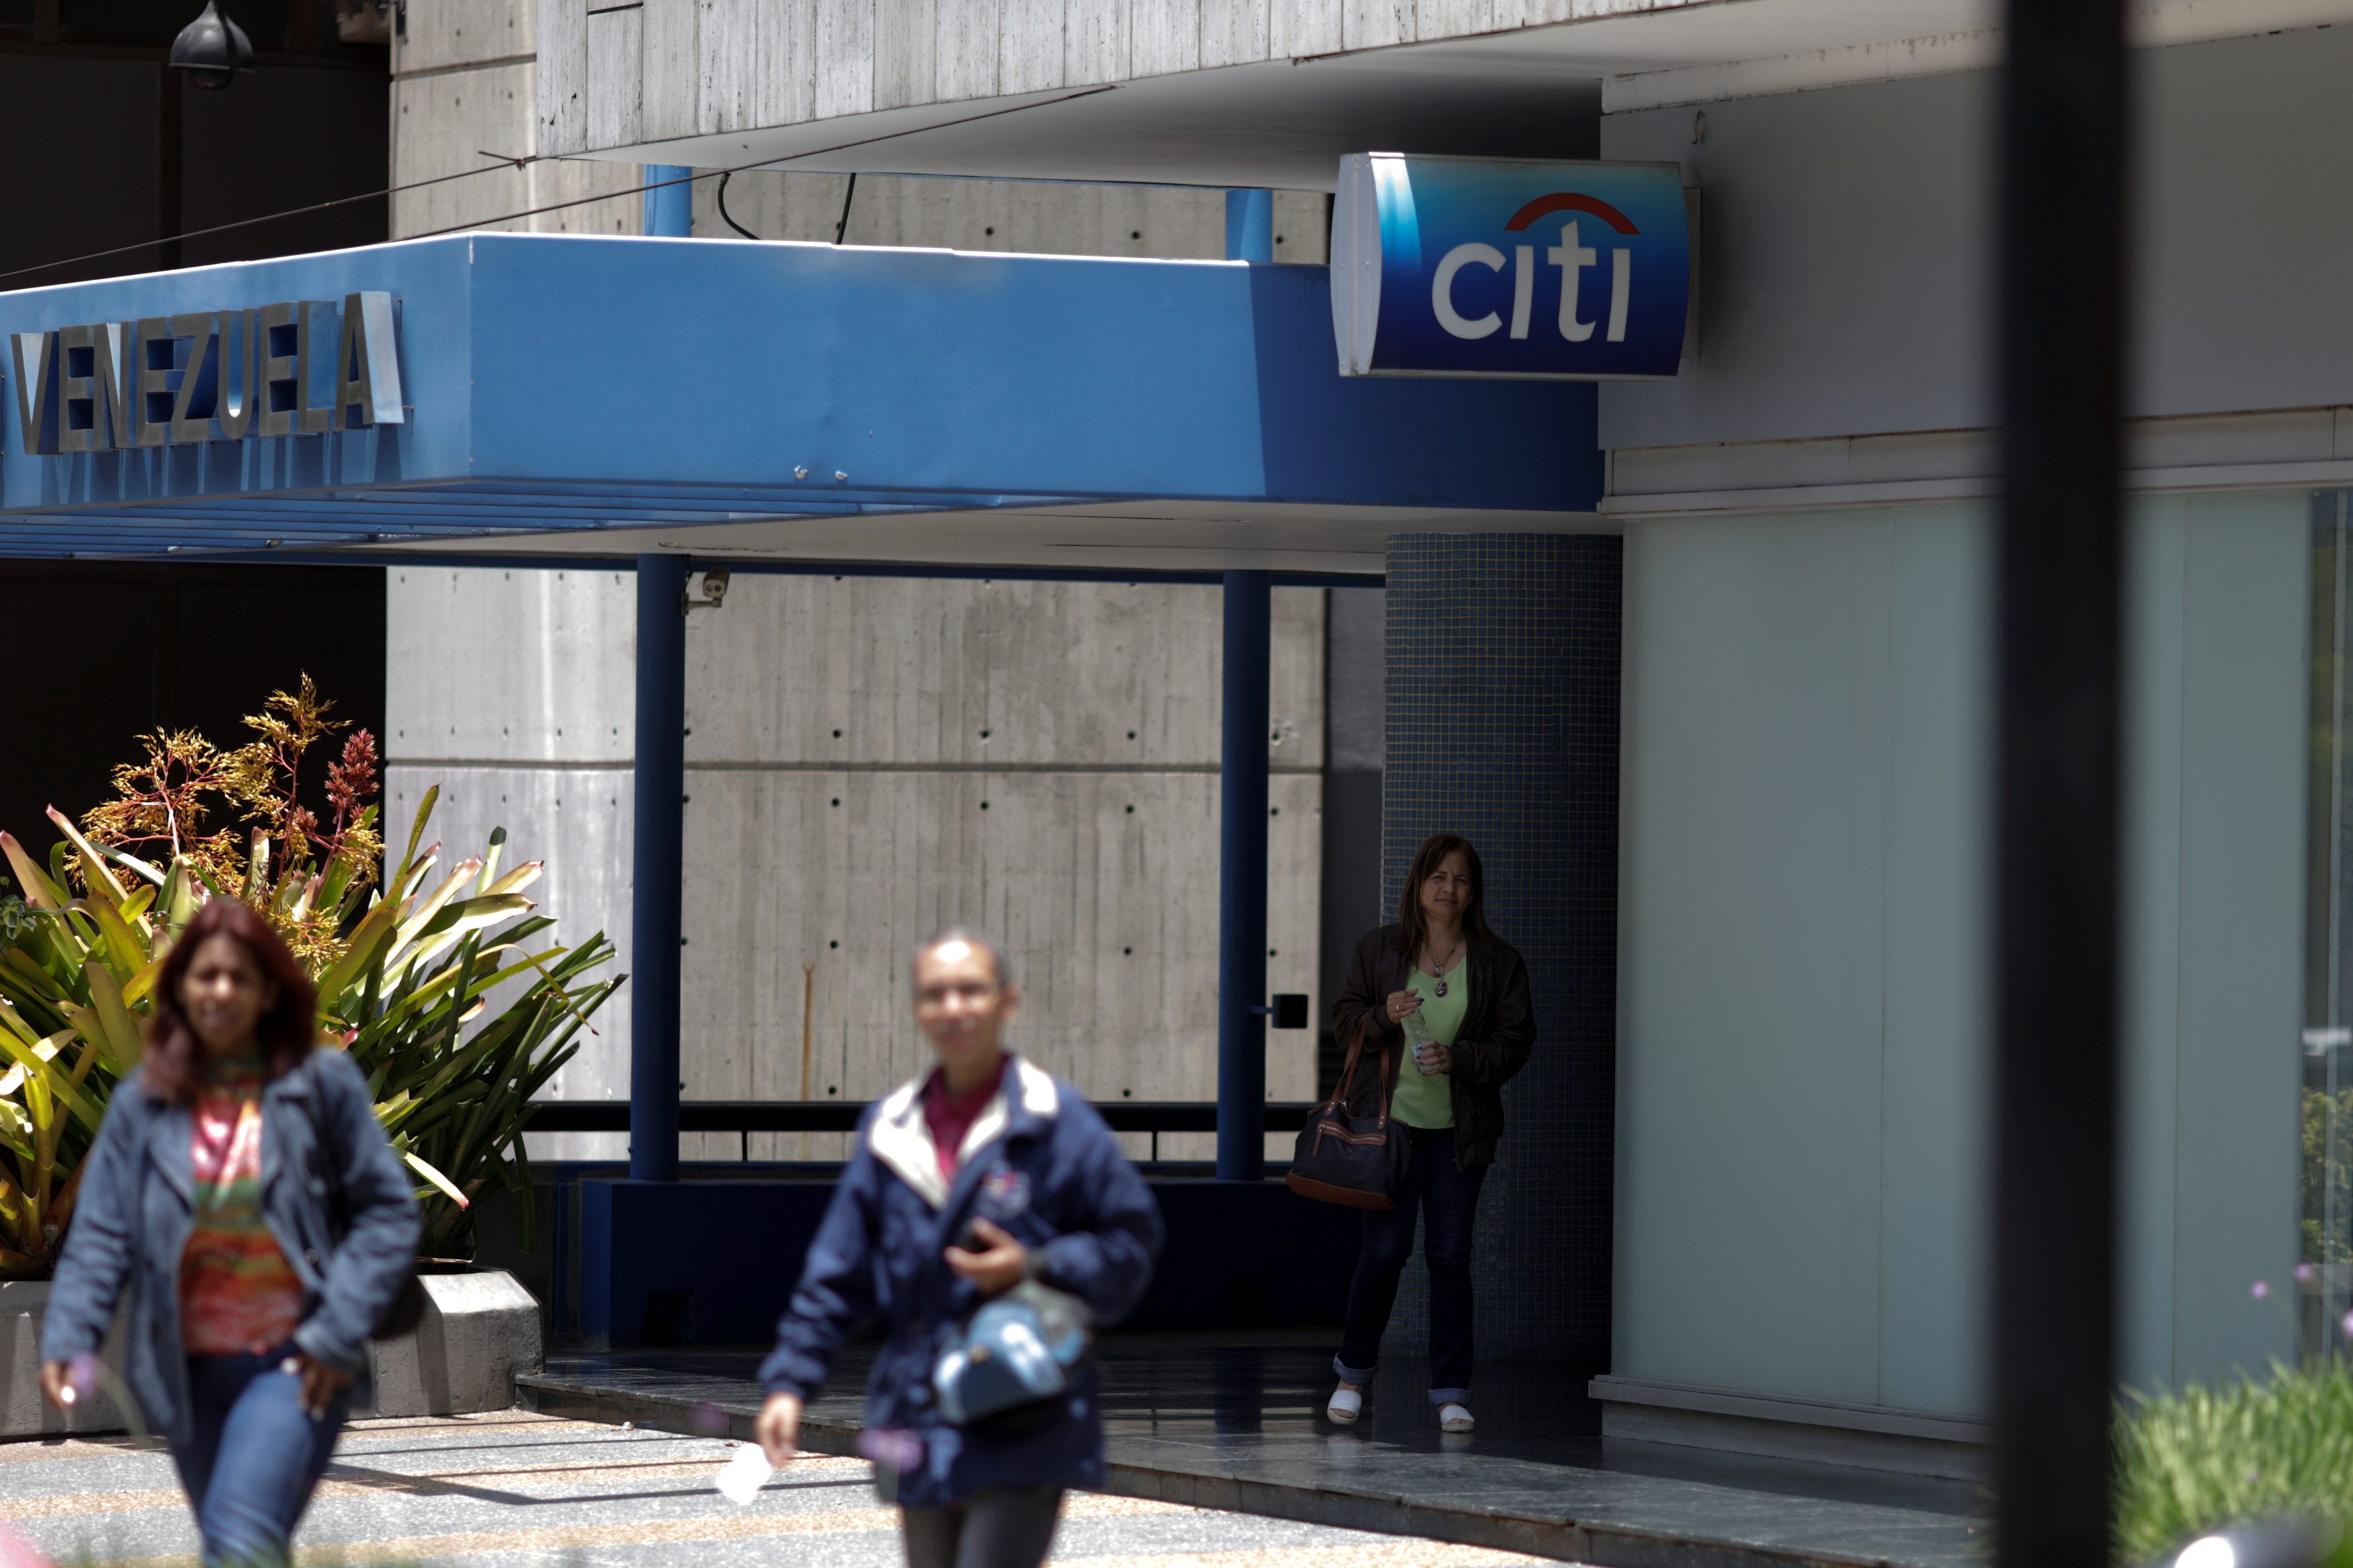 Venezuelan banks shrivel as inflation roars and credit dries up